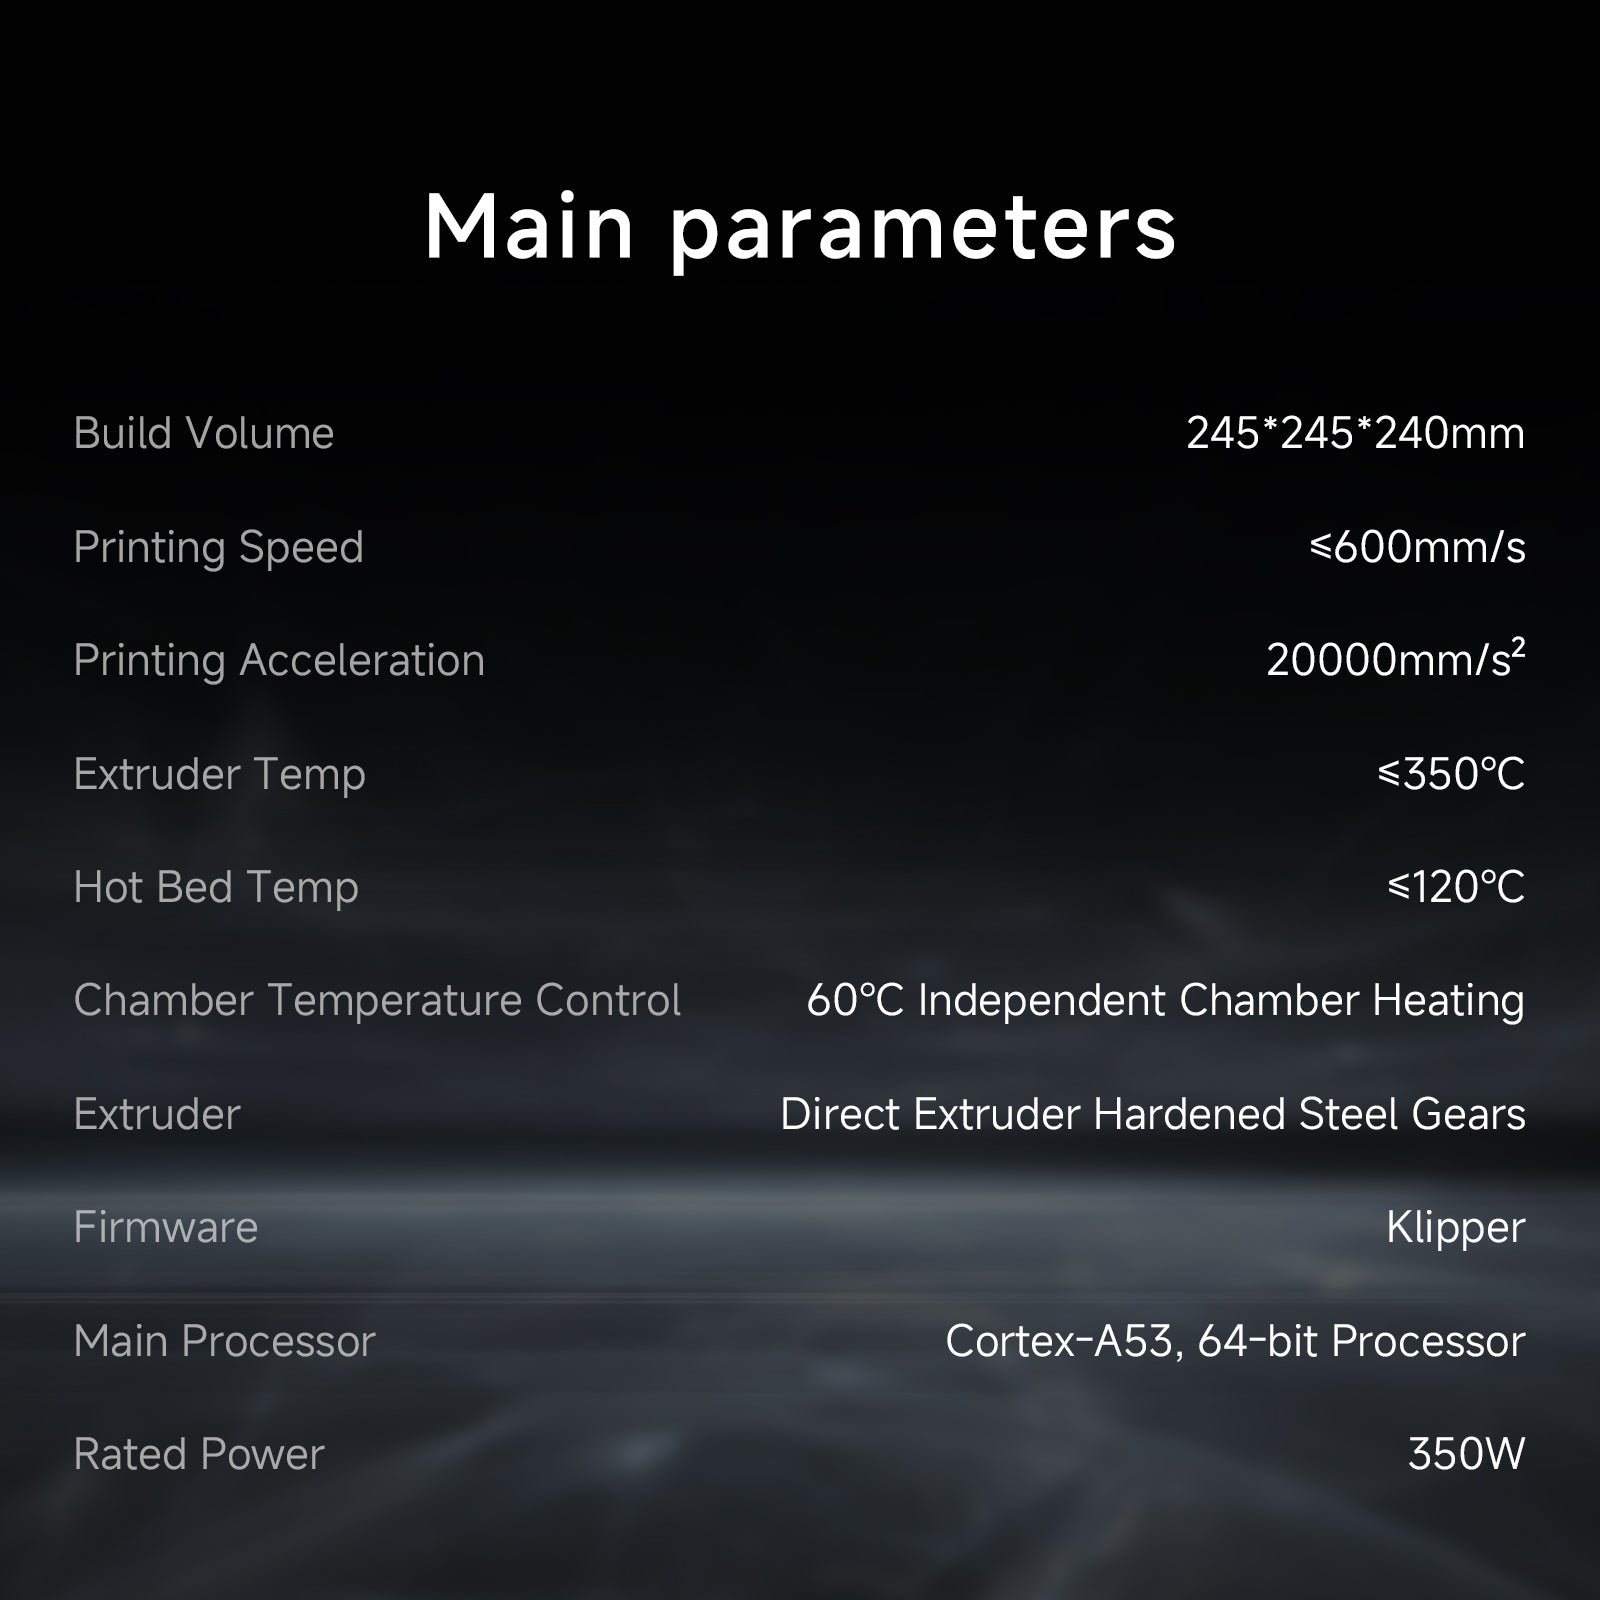 the main parameters of q1 pro 3d printer, it has hight printing speed up to 600mm/s and 245x245x245mm large bulid volume